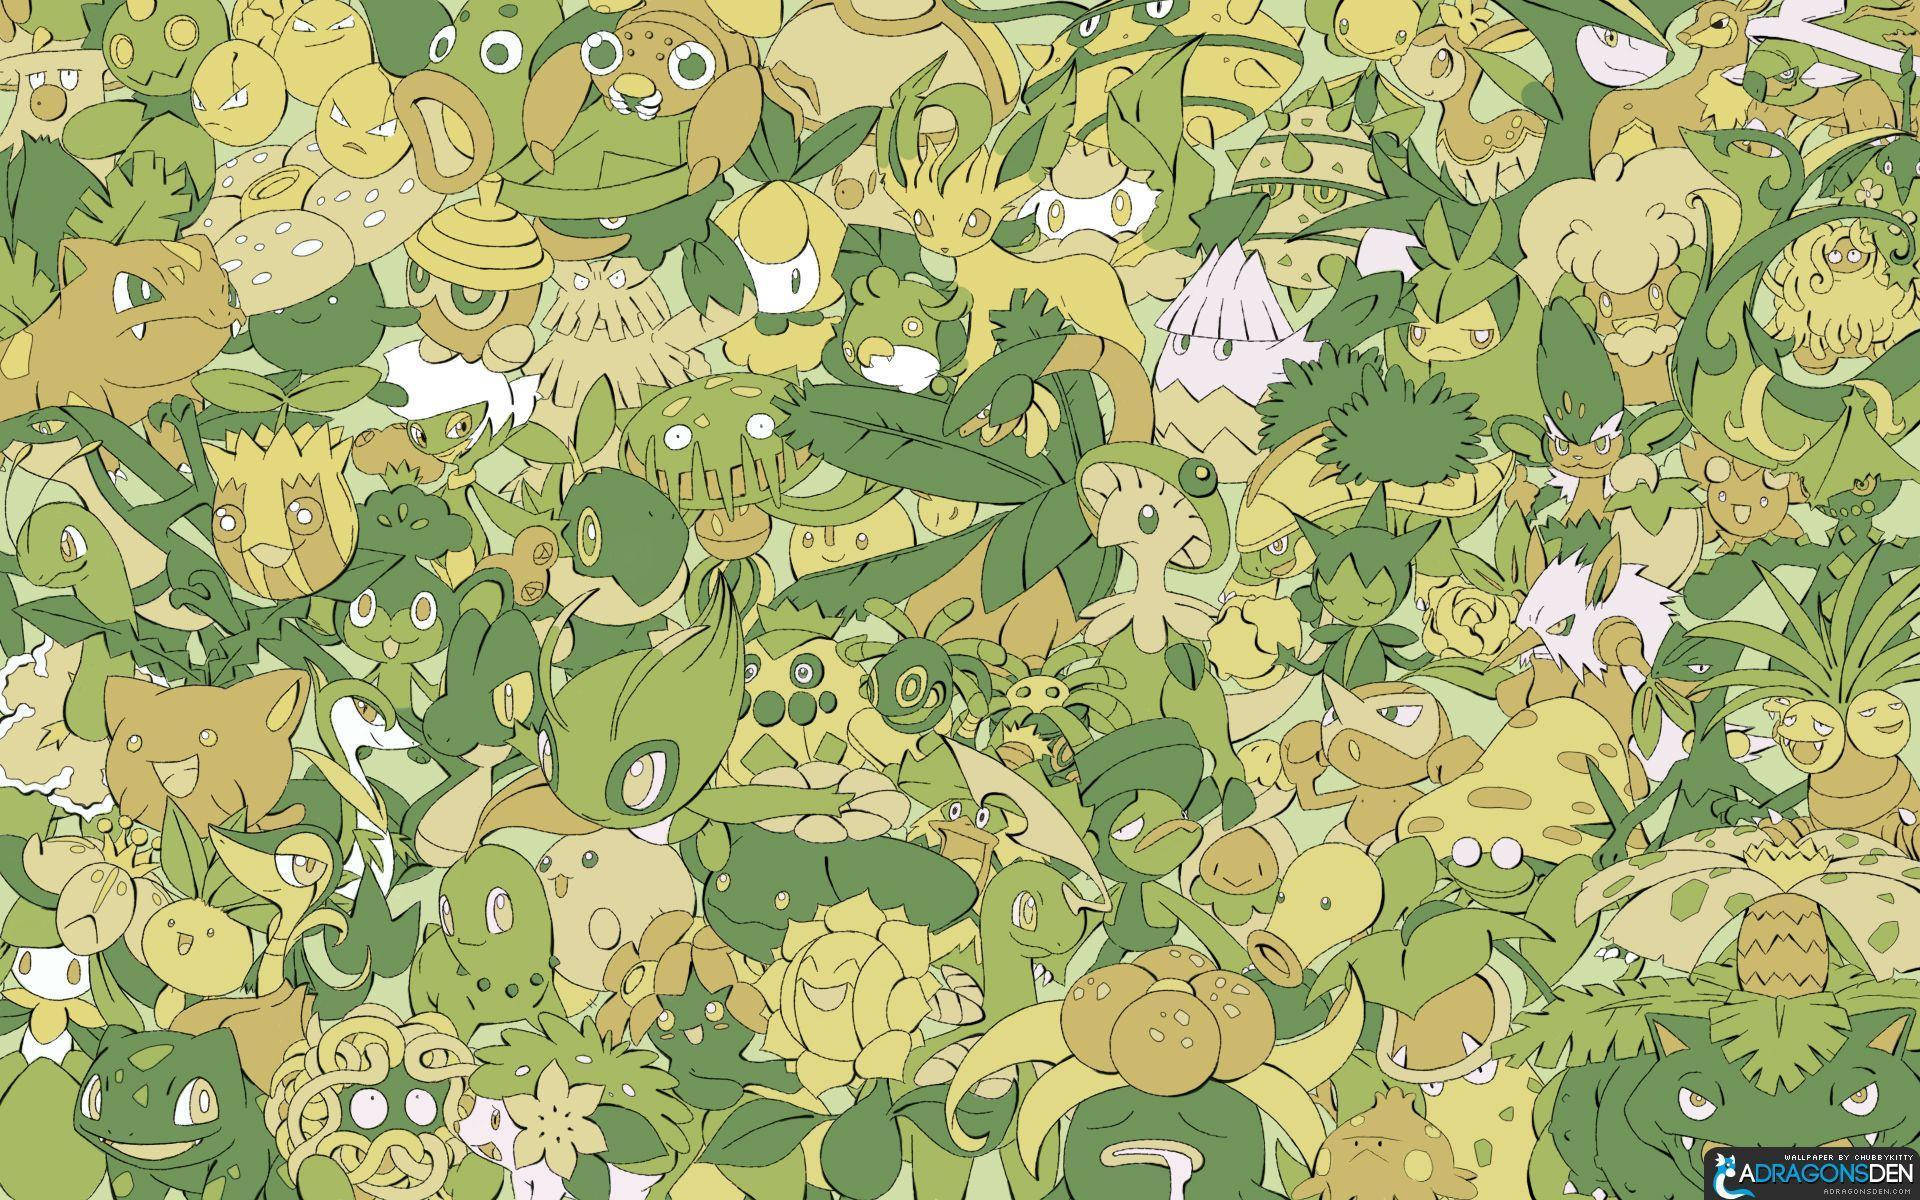 Green Pokemon Wallpaper & Background Beautiful Best Available For Download Green Pokemon Photo Free On Zicxa.com Image